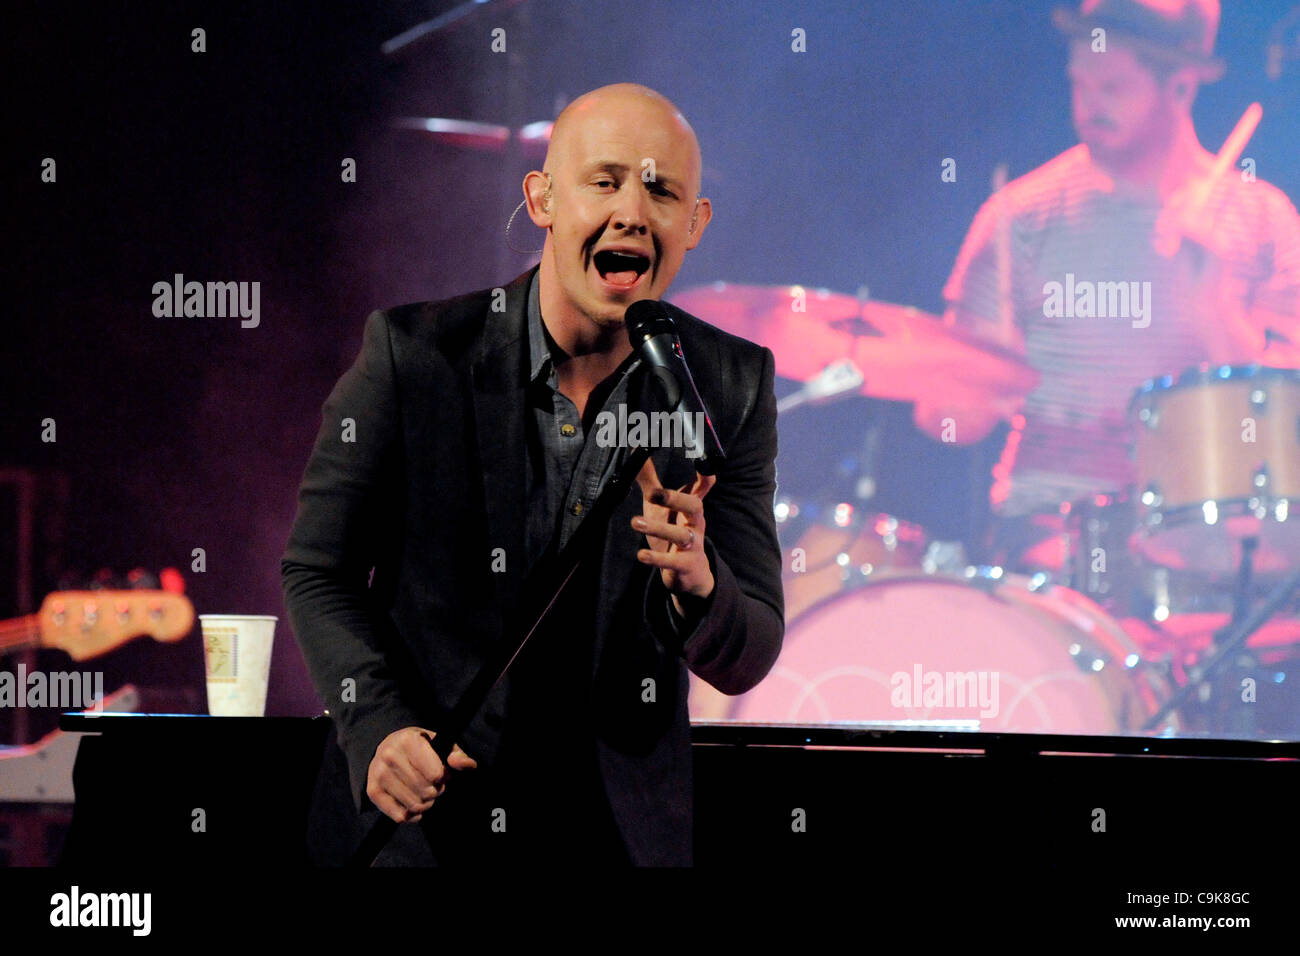 January 17, 2012, Toronto, Canada - American band 'The Fray' performs at The Opera House. In photo, lead singer Isaac Slade. Stock Photo